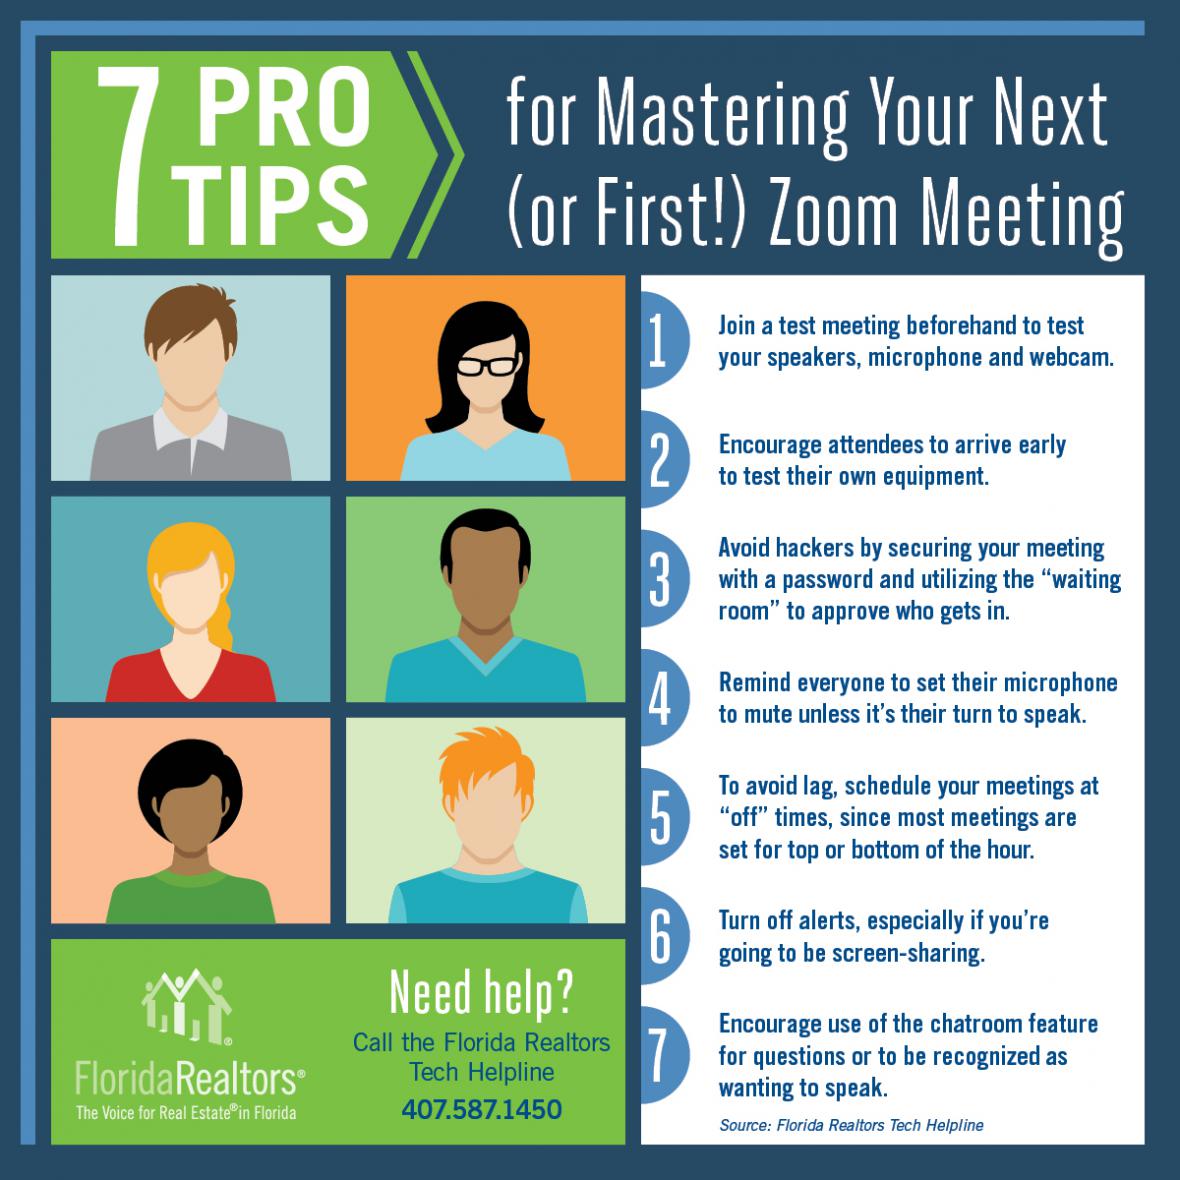 7 Pro Tips for Mastering Your Next (or First!) Zoom Meeting